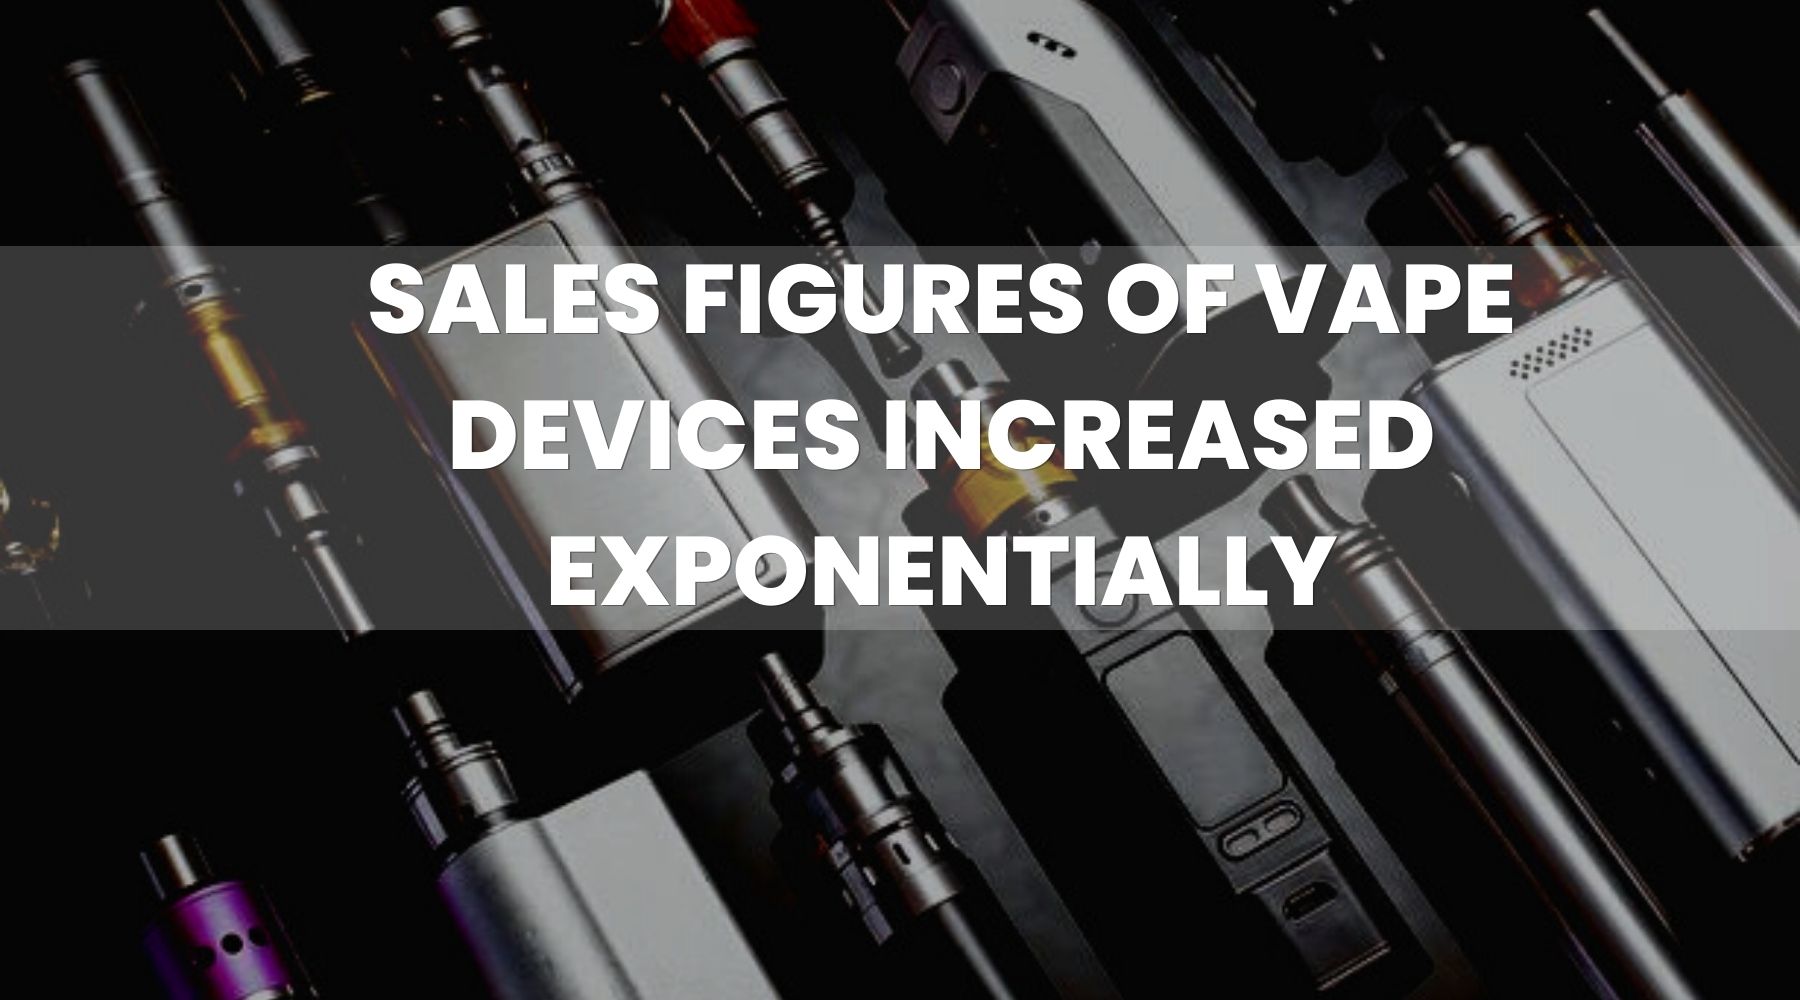 Sales figures of vape devices increased exponentially between May 2021 and May 2022